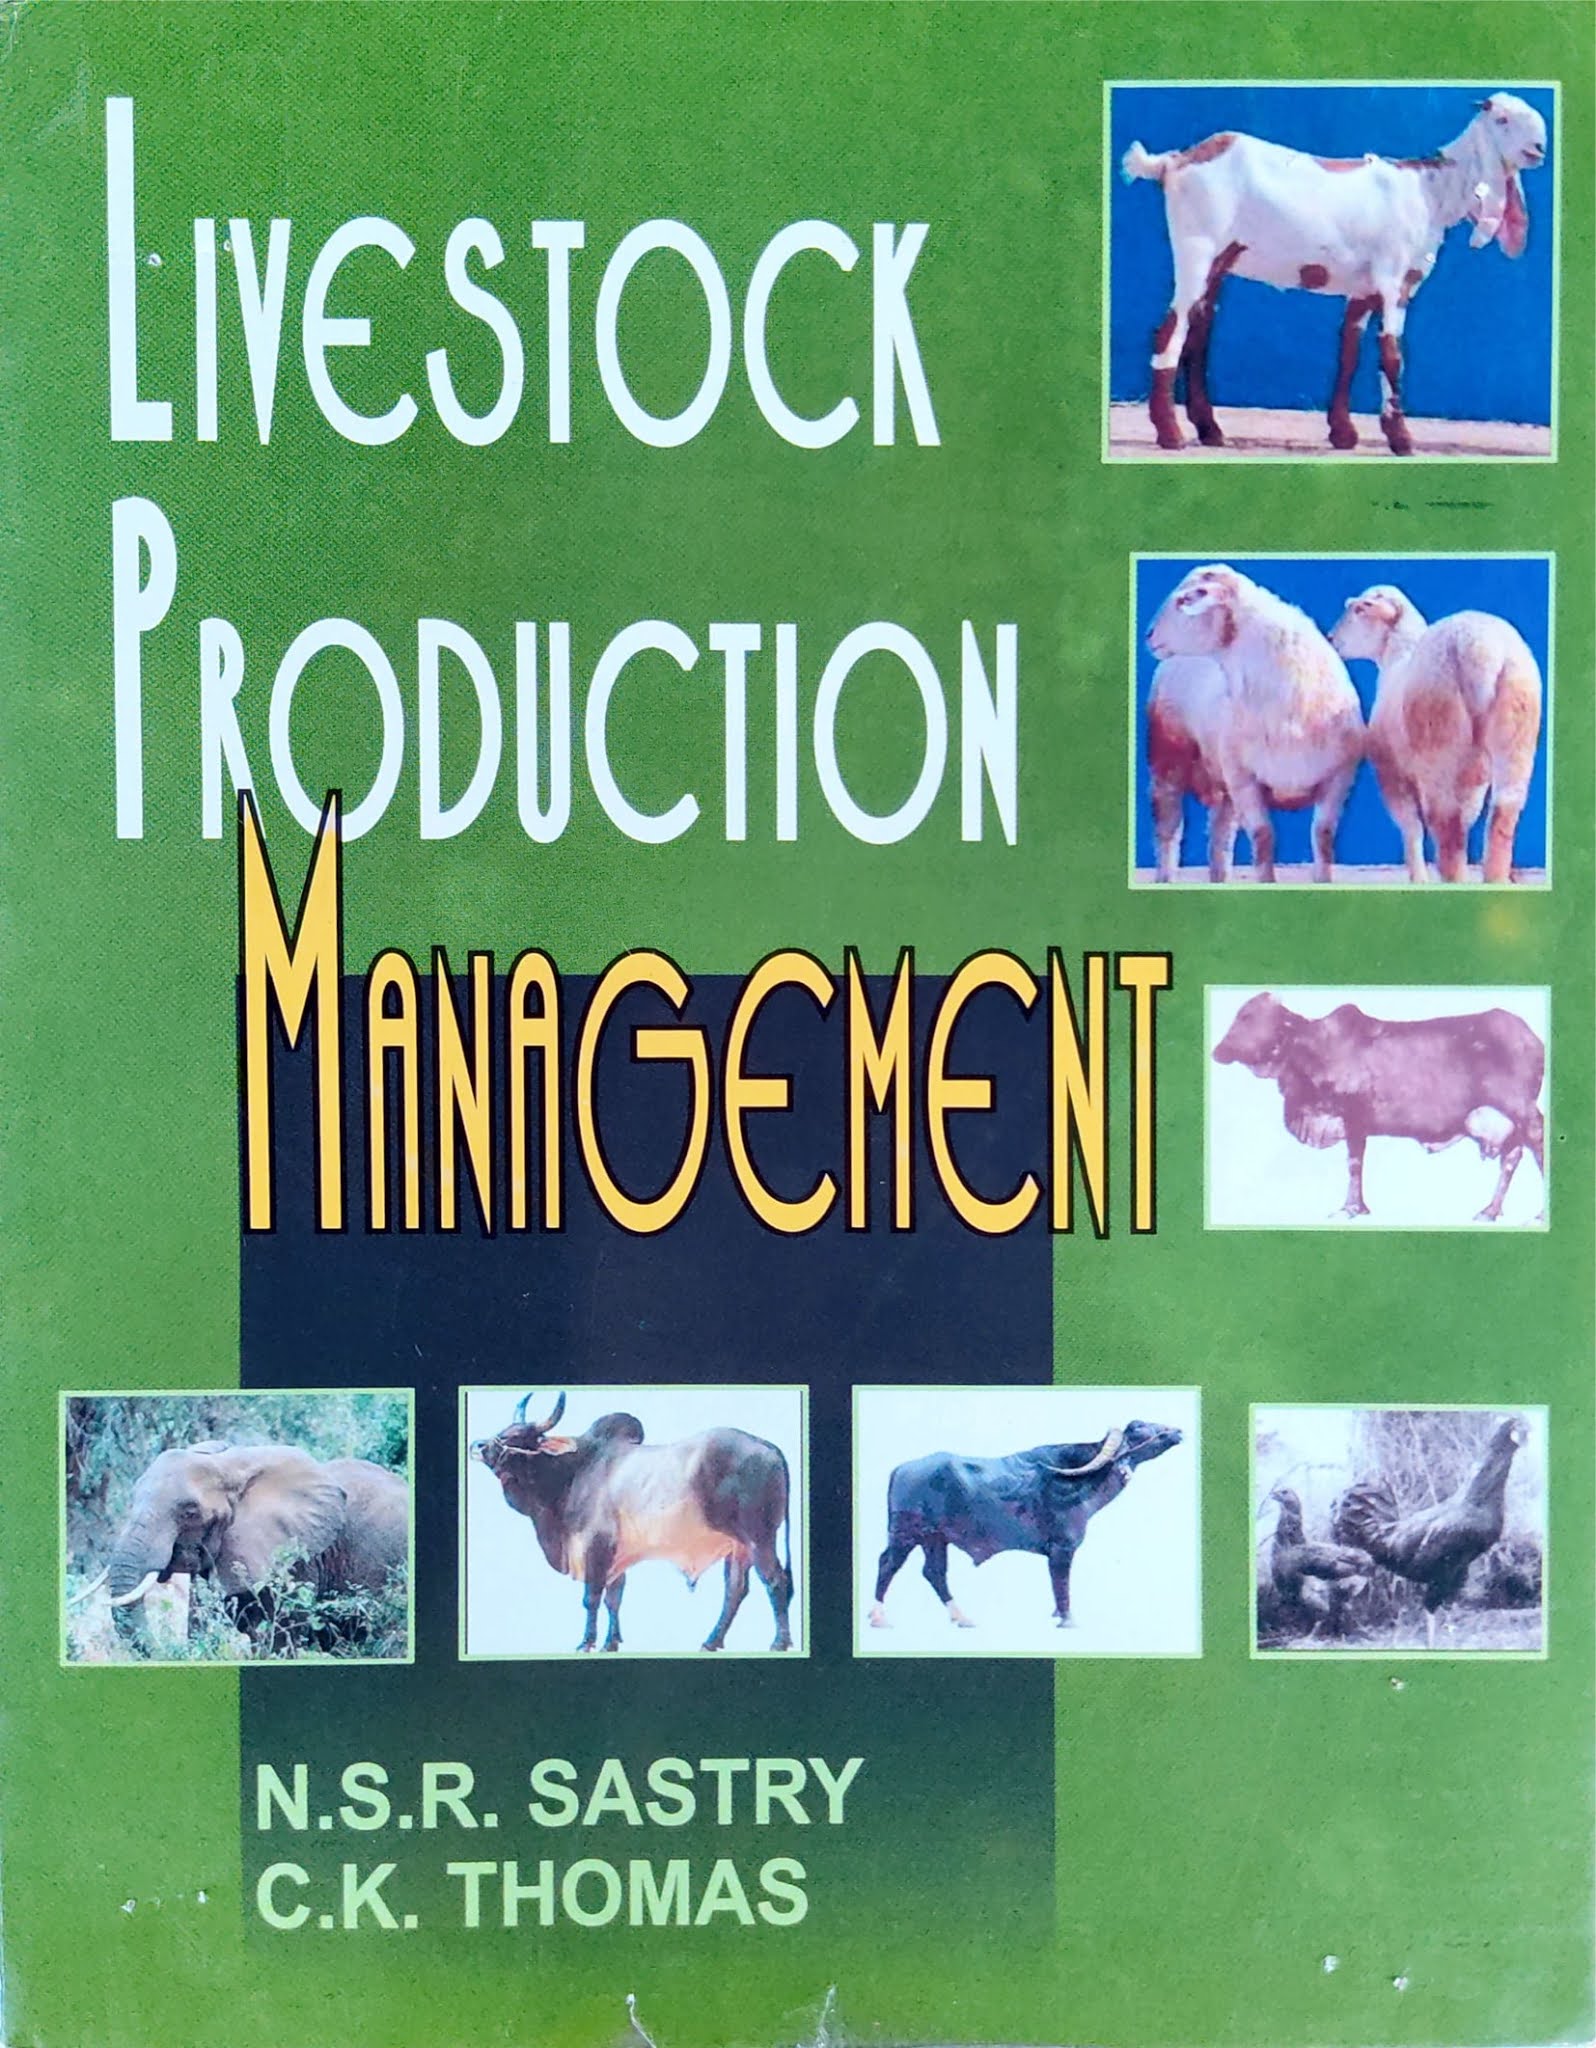 LIVESTOCK PRODUCTION MANAGMENT AND DAIRY BOVINE PRODUCTION BOOKS BY THOMAS  AND SASTRY